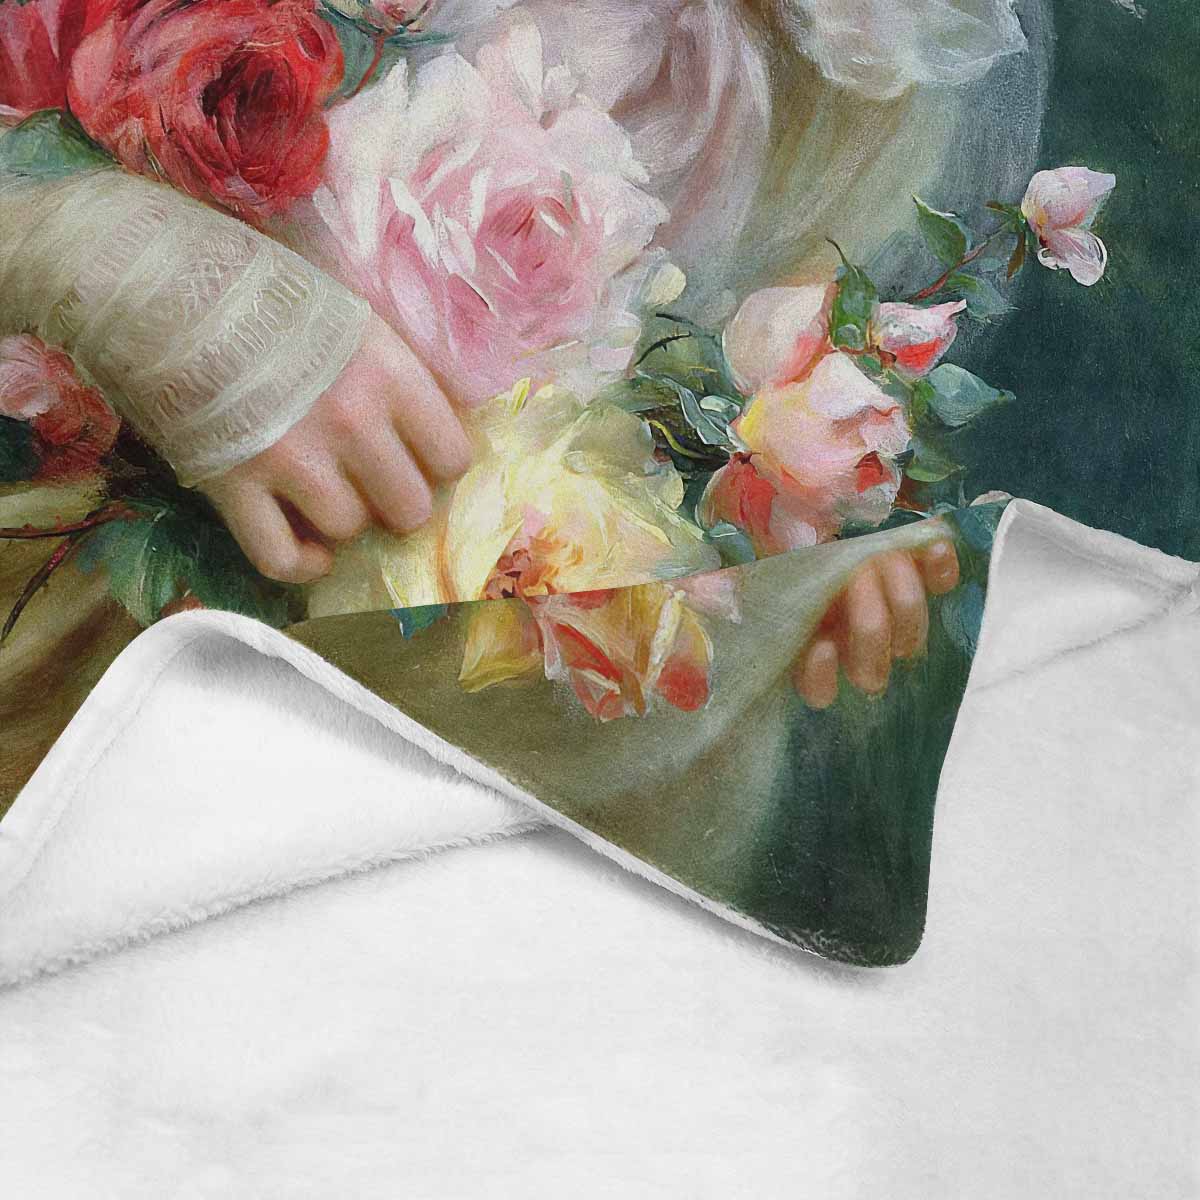 Victorian Lady Design BLANKET, LARGE 60 in x 80 in, Elegant Lady With A Bouquet Of Roses 1